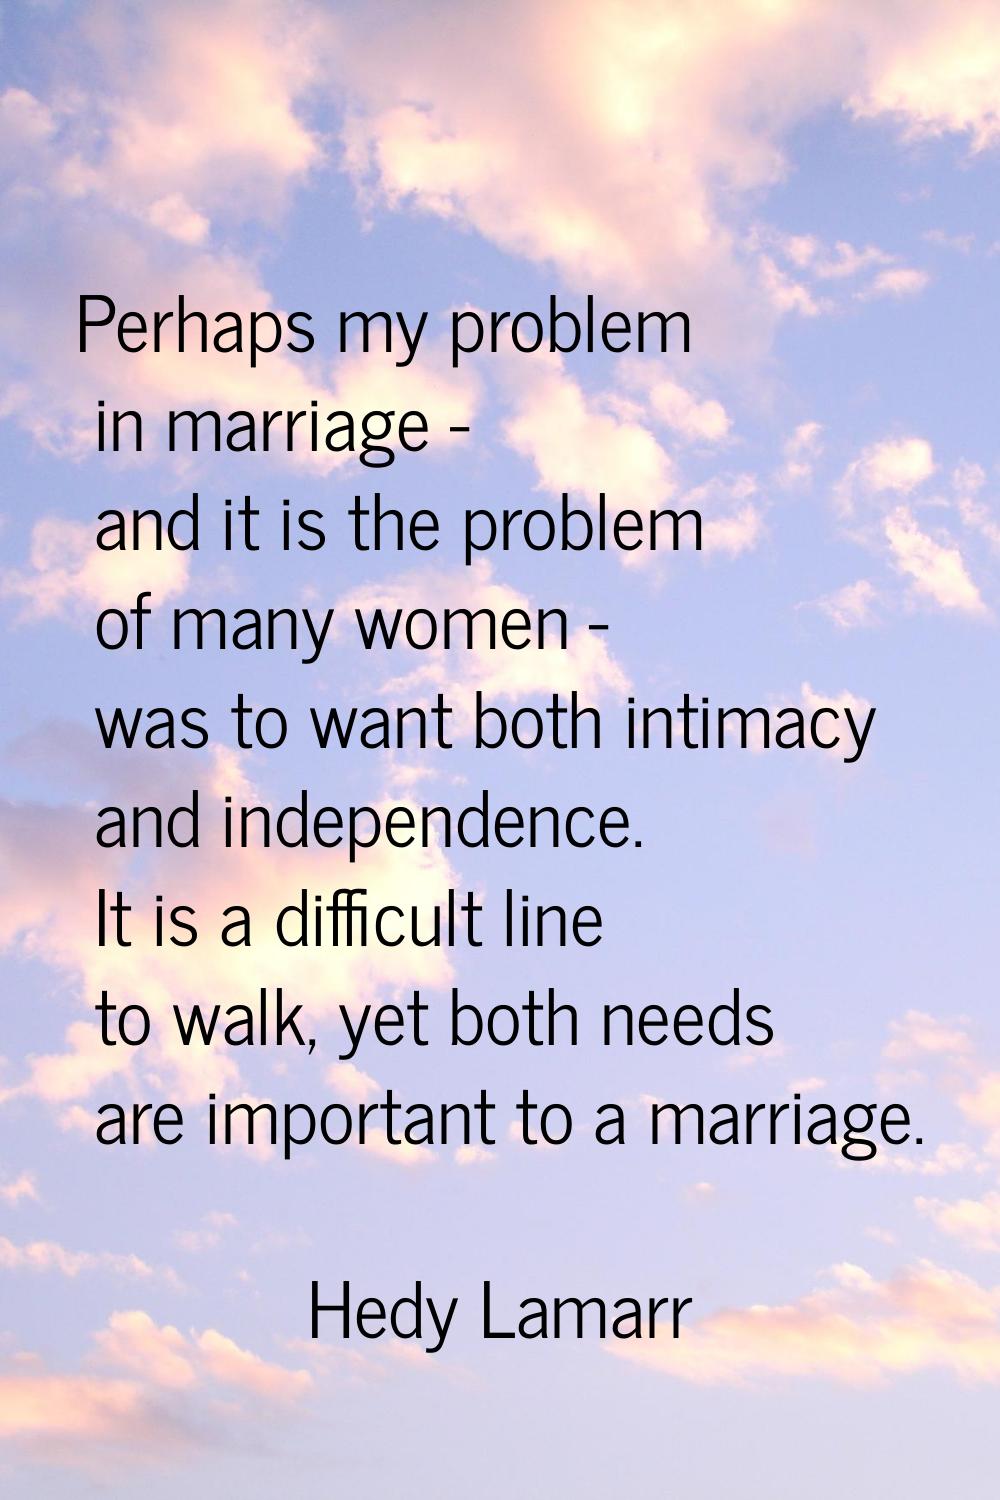 Perhaps my problem in marriage - and it is the problem of many women - was to want both intimacy an